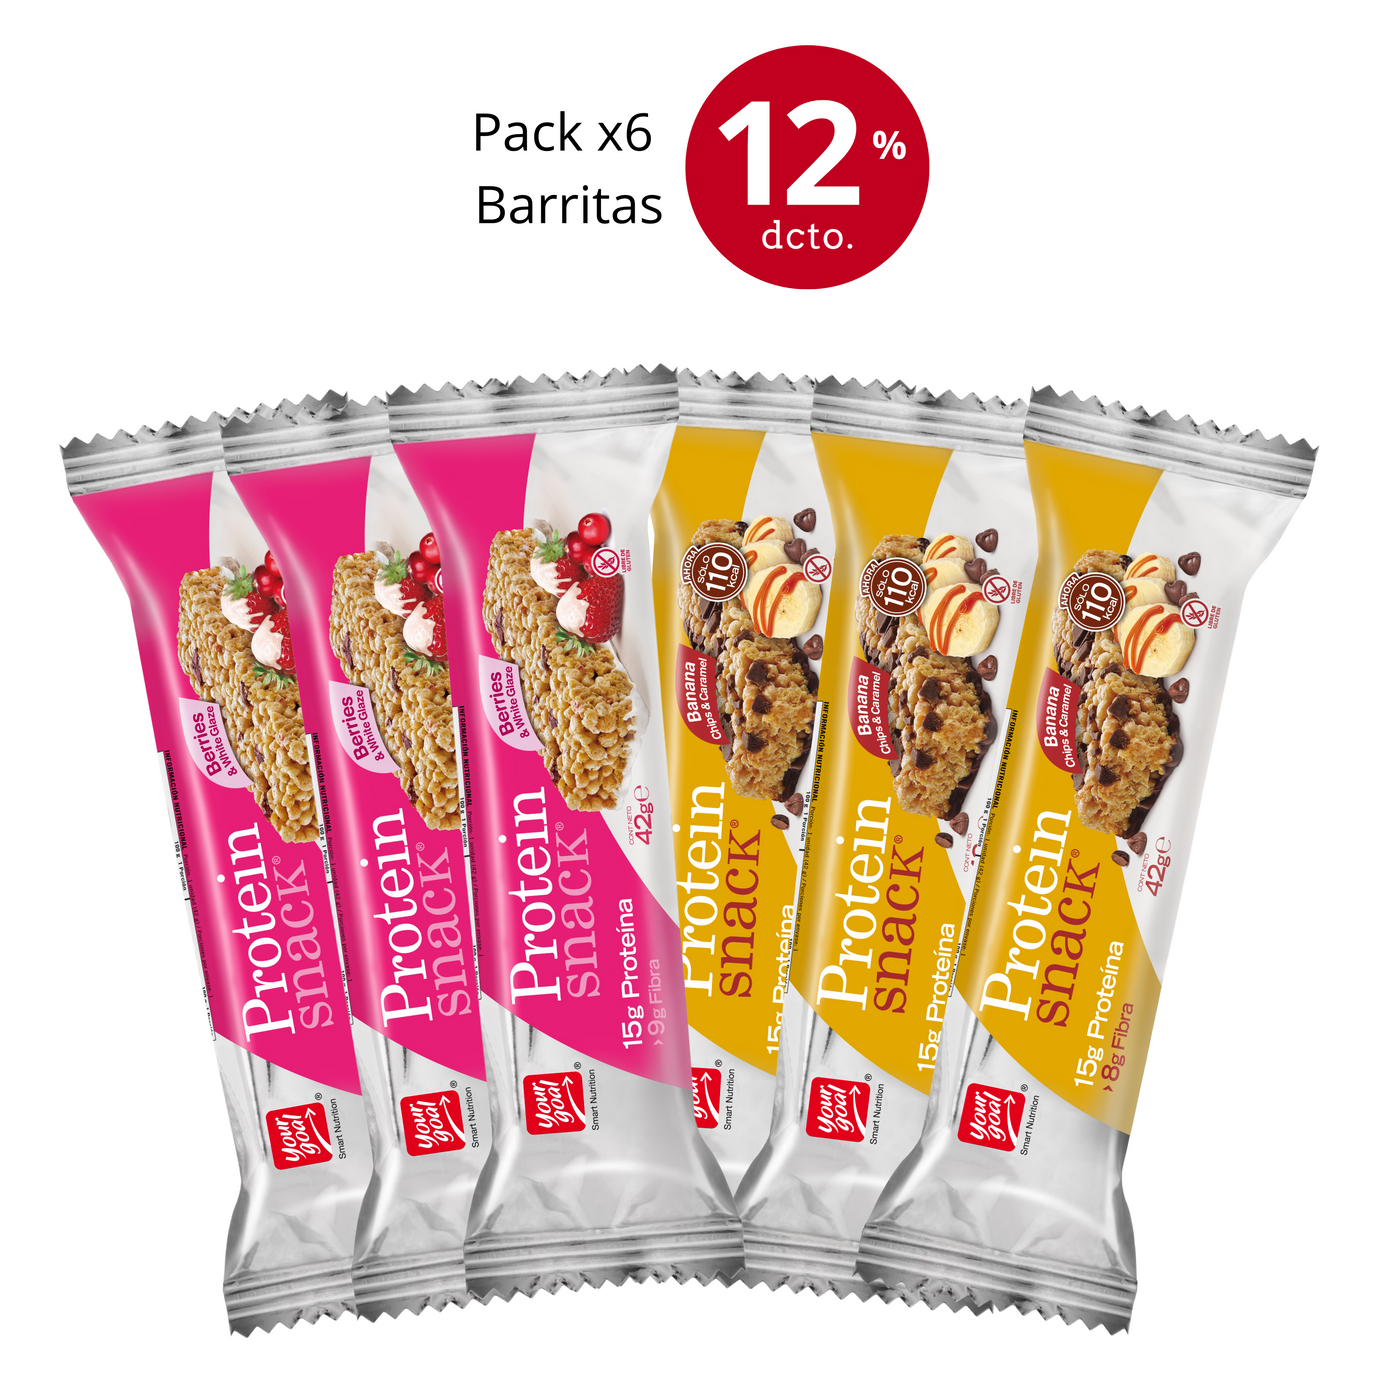 PACK X6 BARRITAS PROTEIN SNACK - VARIETY BOX